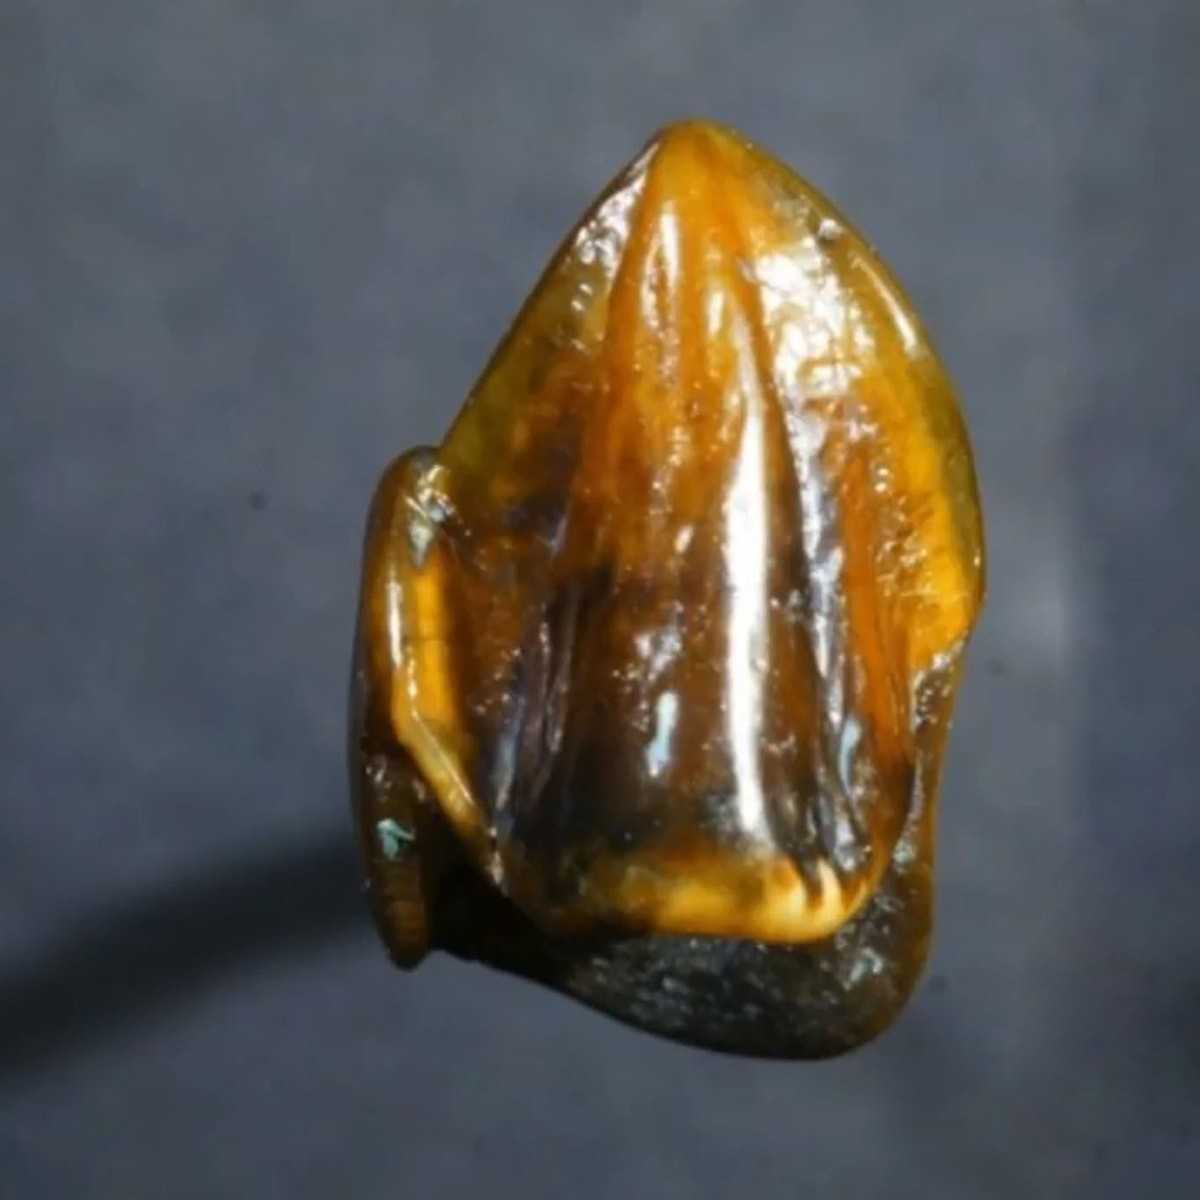 10 million-year-old Tooth